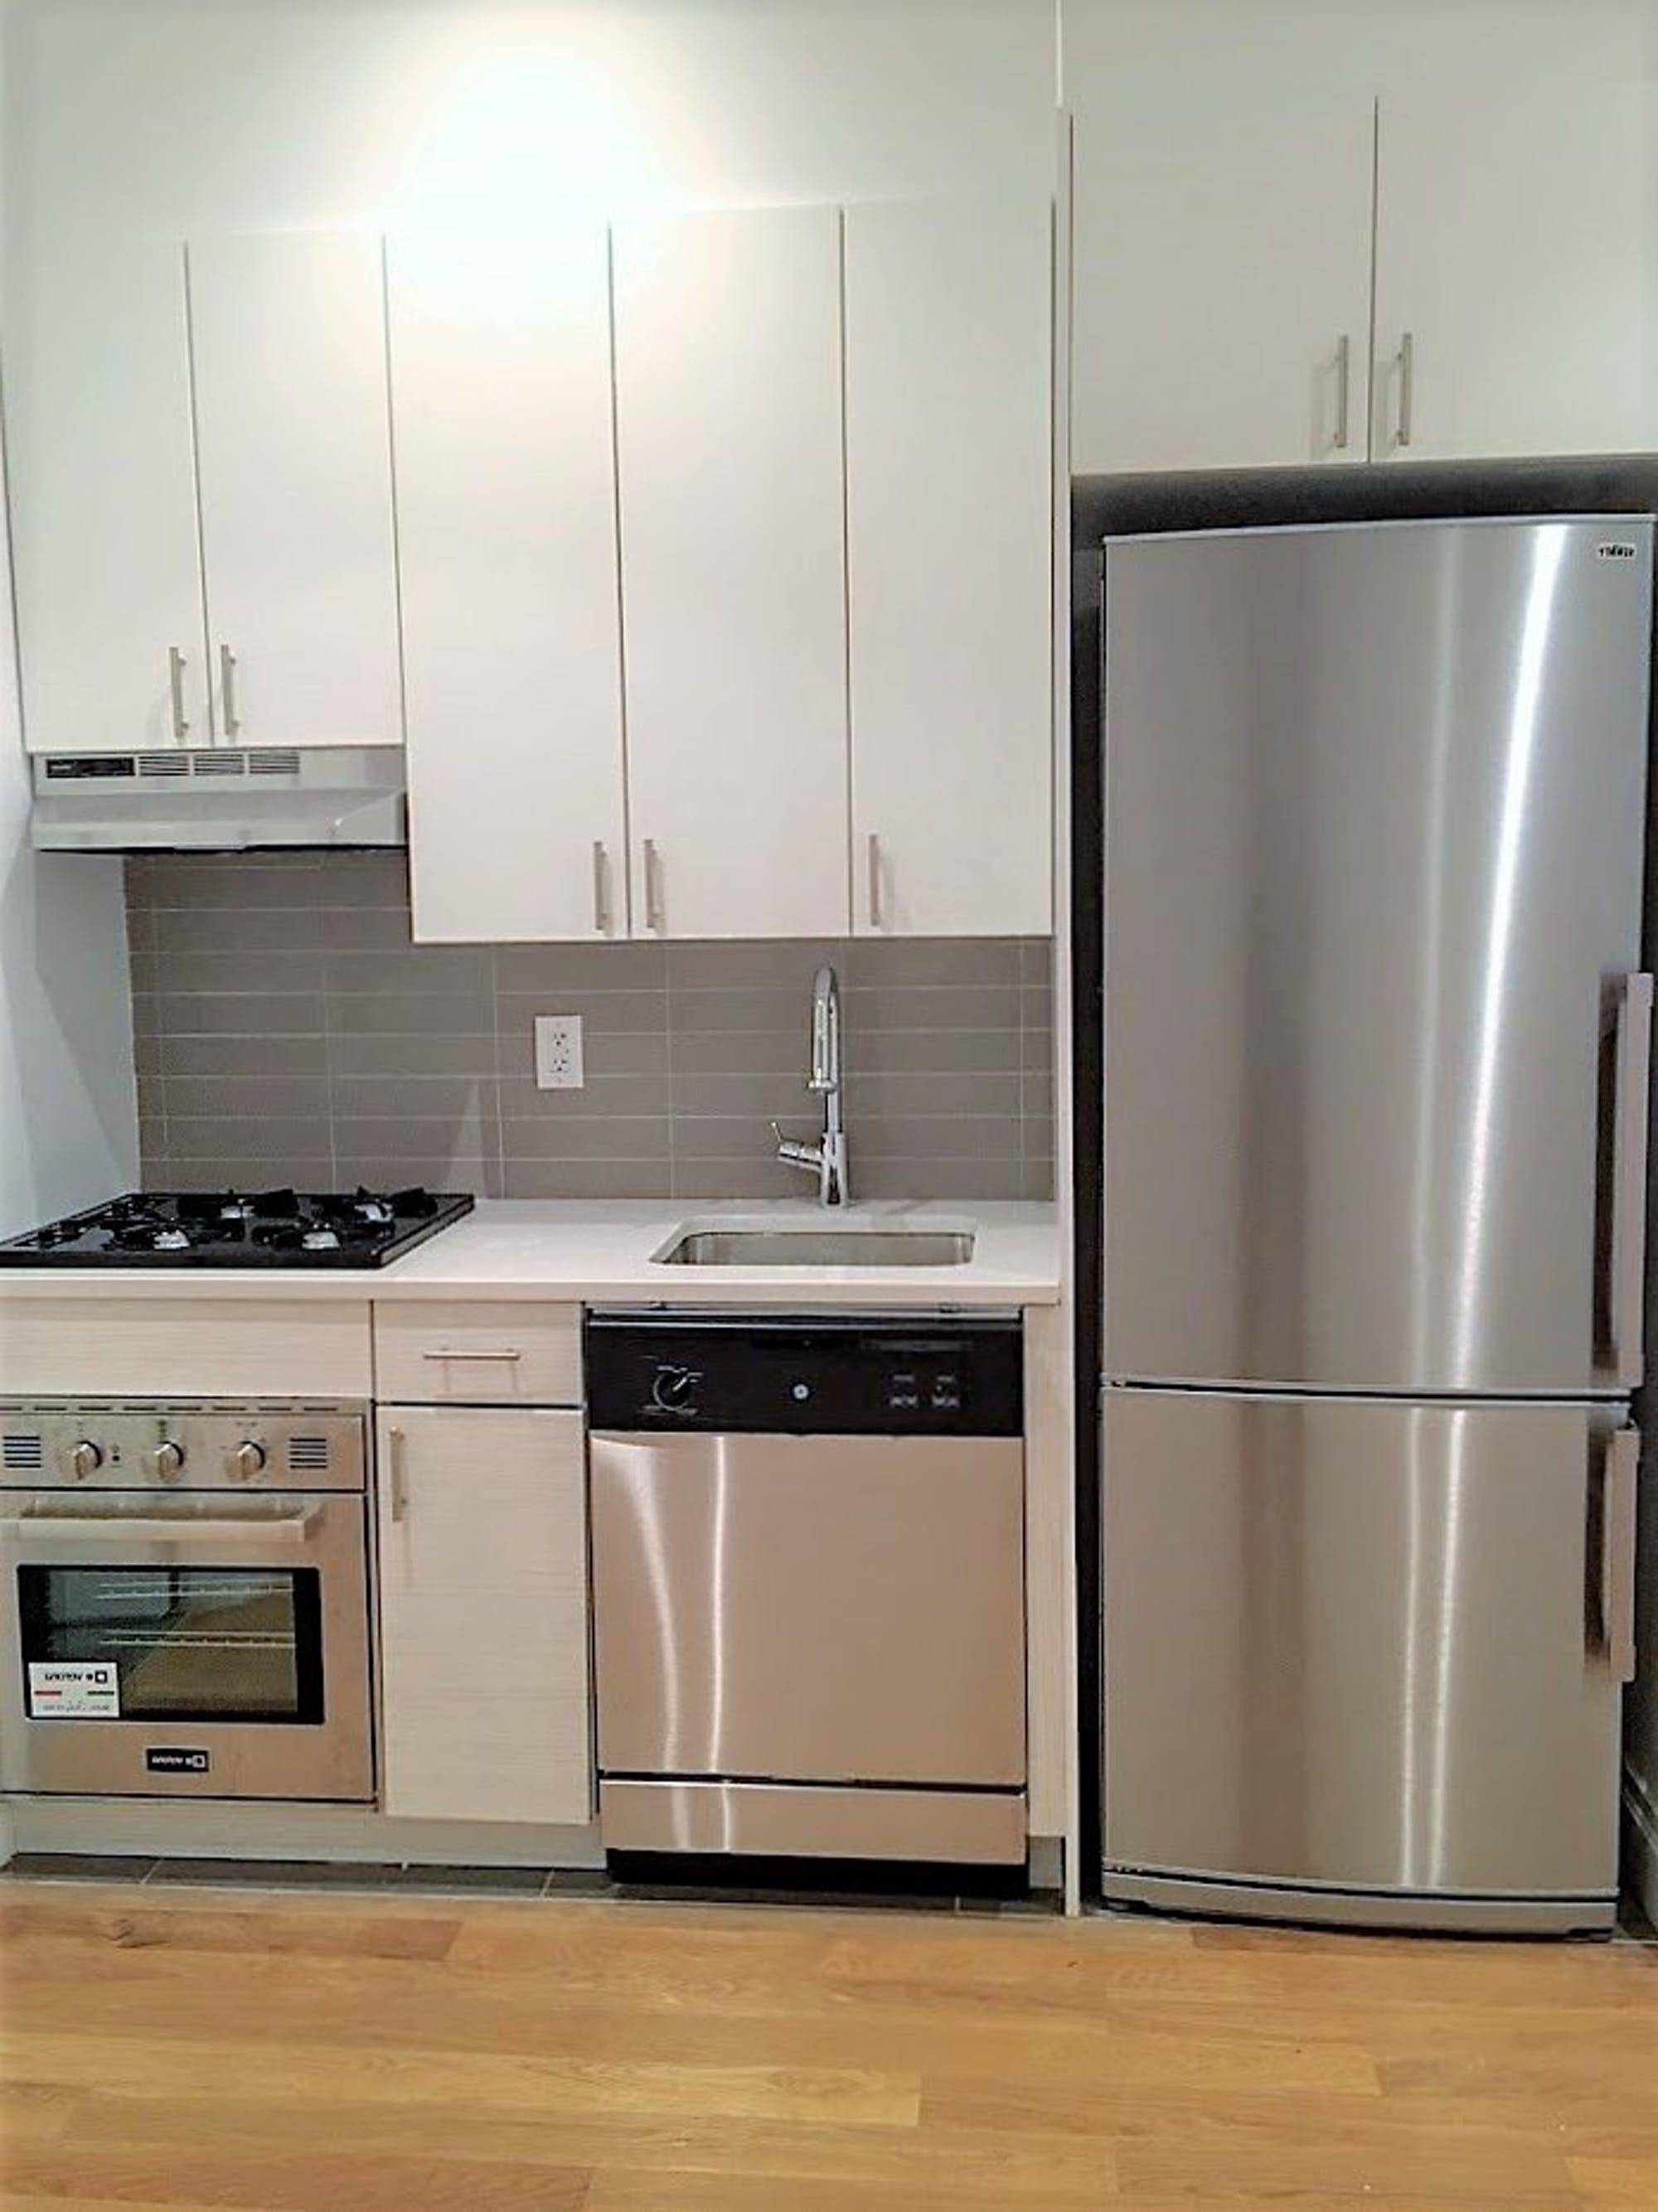 NO FEE VIRTUAL amp ; IN PERSON TOURS AVAILABLE Beautifully RENOVATED 1 Bedroom Apartment in Prime Midtown East Location Apartment Features Spacious Queen sized Bedroom Stainless Steel Appliances including Dishwasher ...